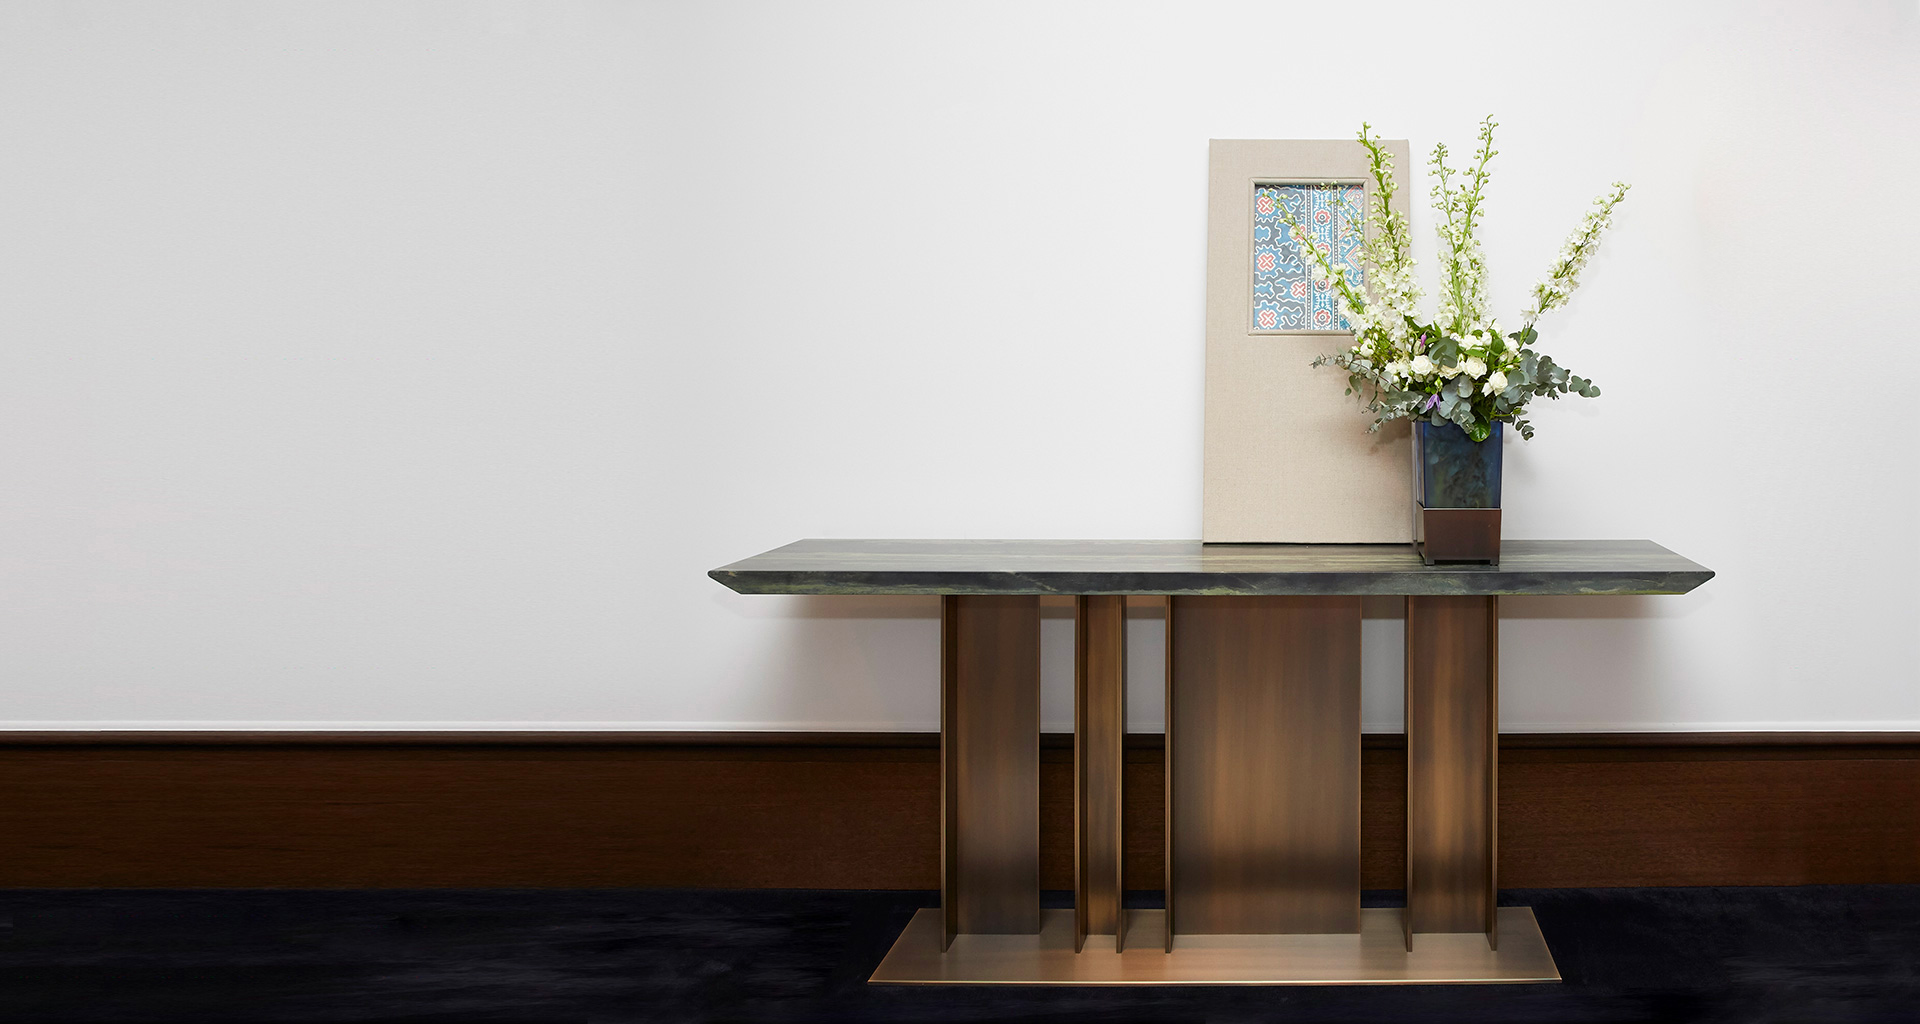 Nila is a console with bronze base and wooden top, from Promemoria's Indigo Tales collection | Promemoria